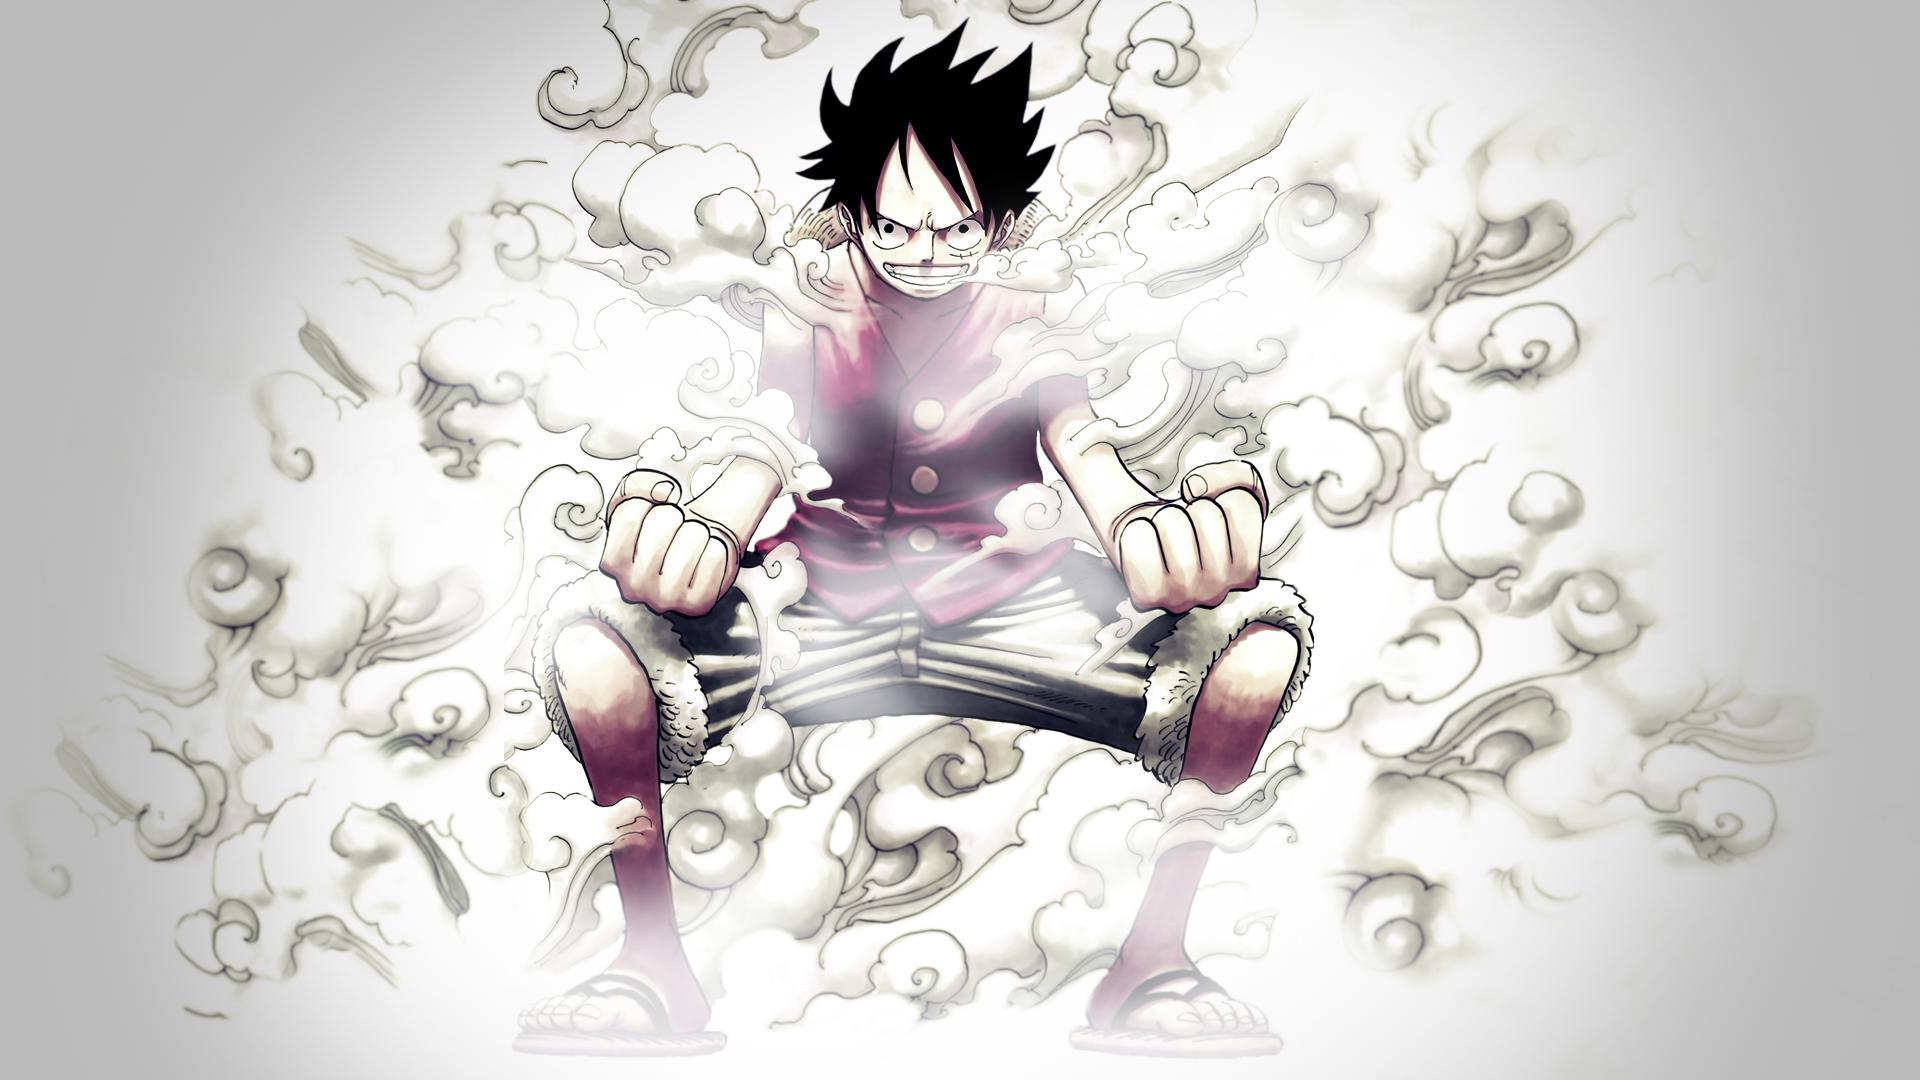 Wallpapers One Piece Luffy Haki - Wallpaper Cave